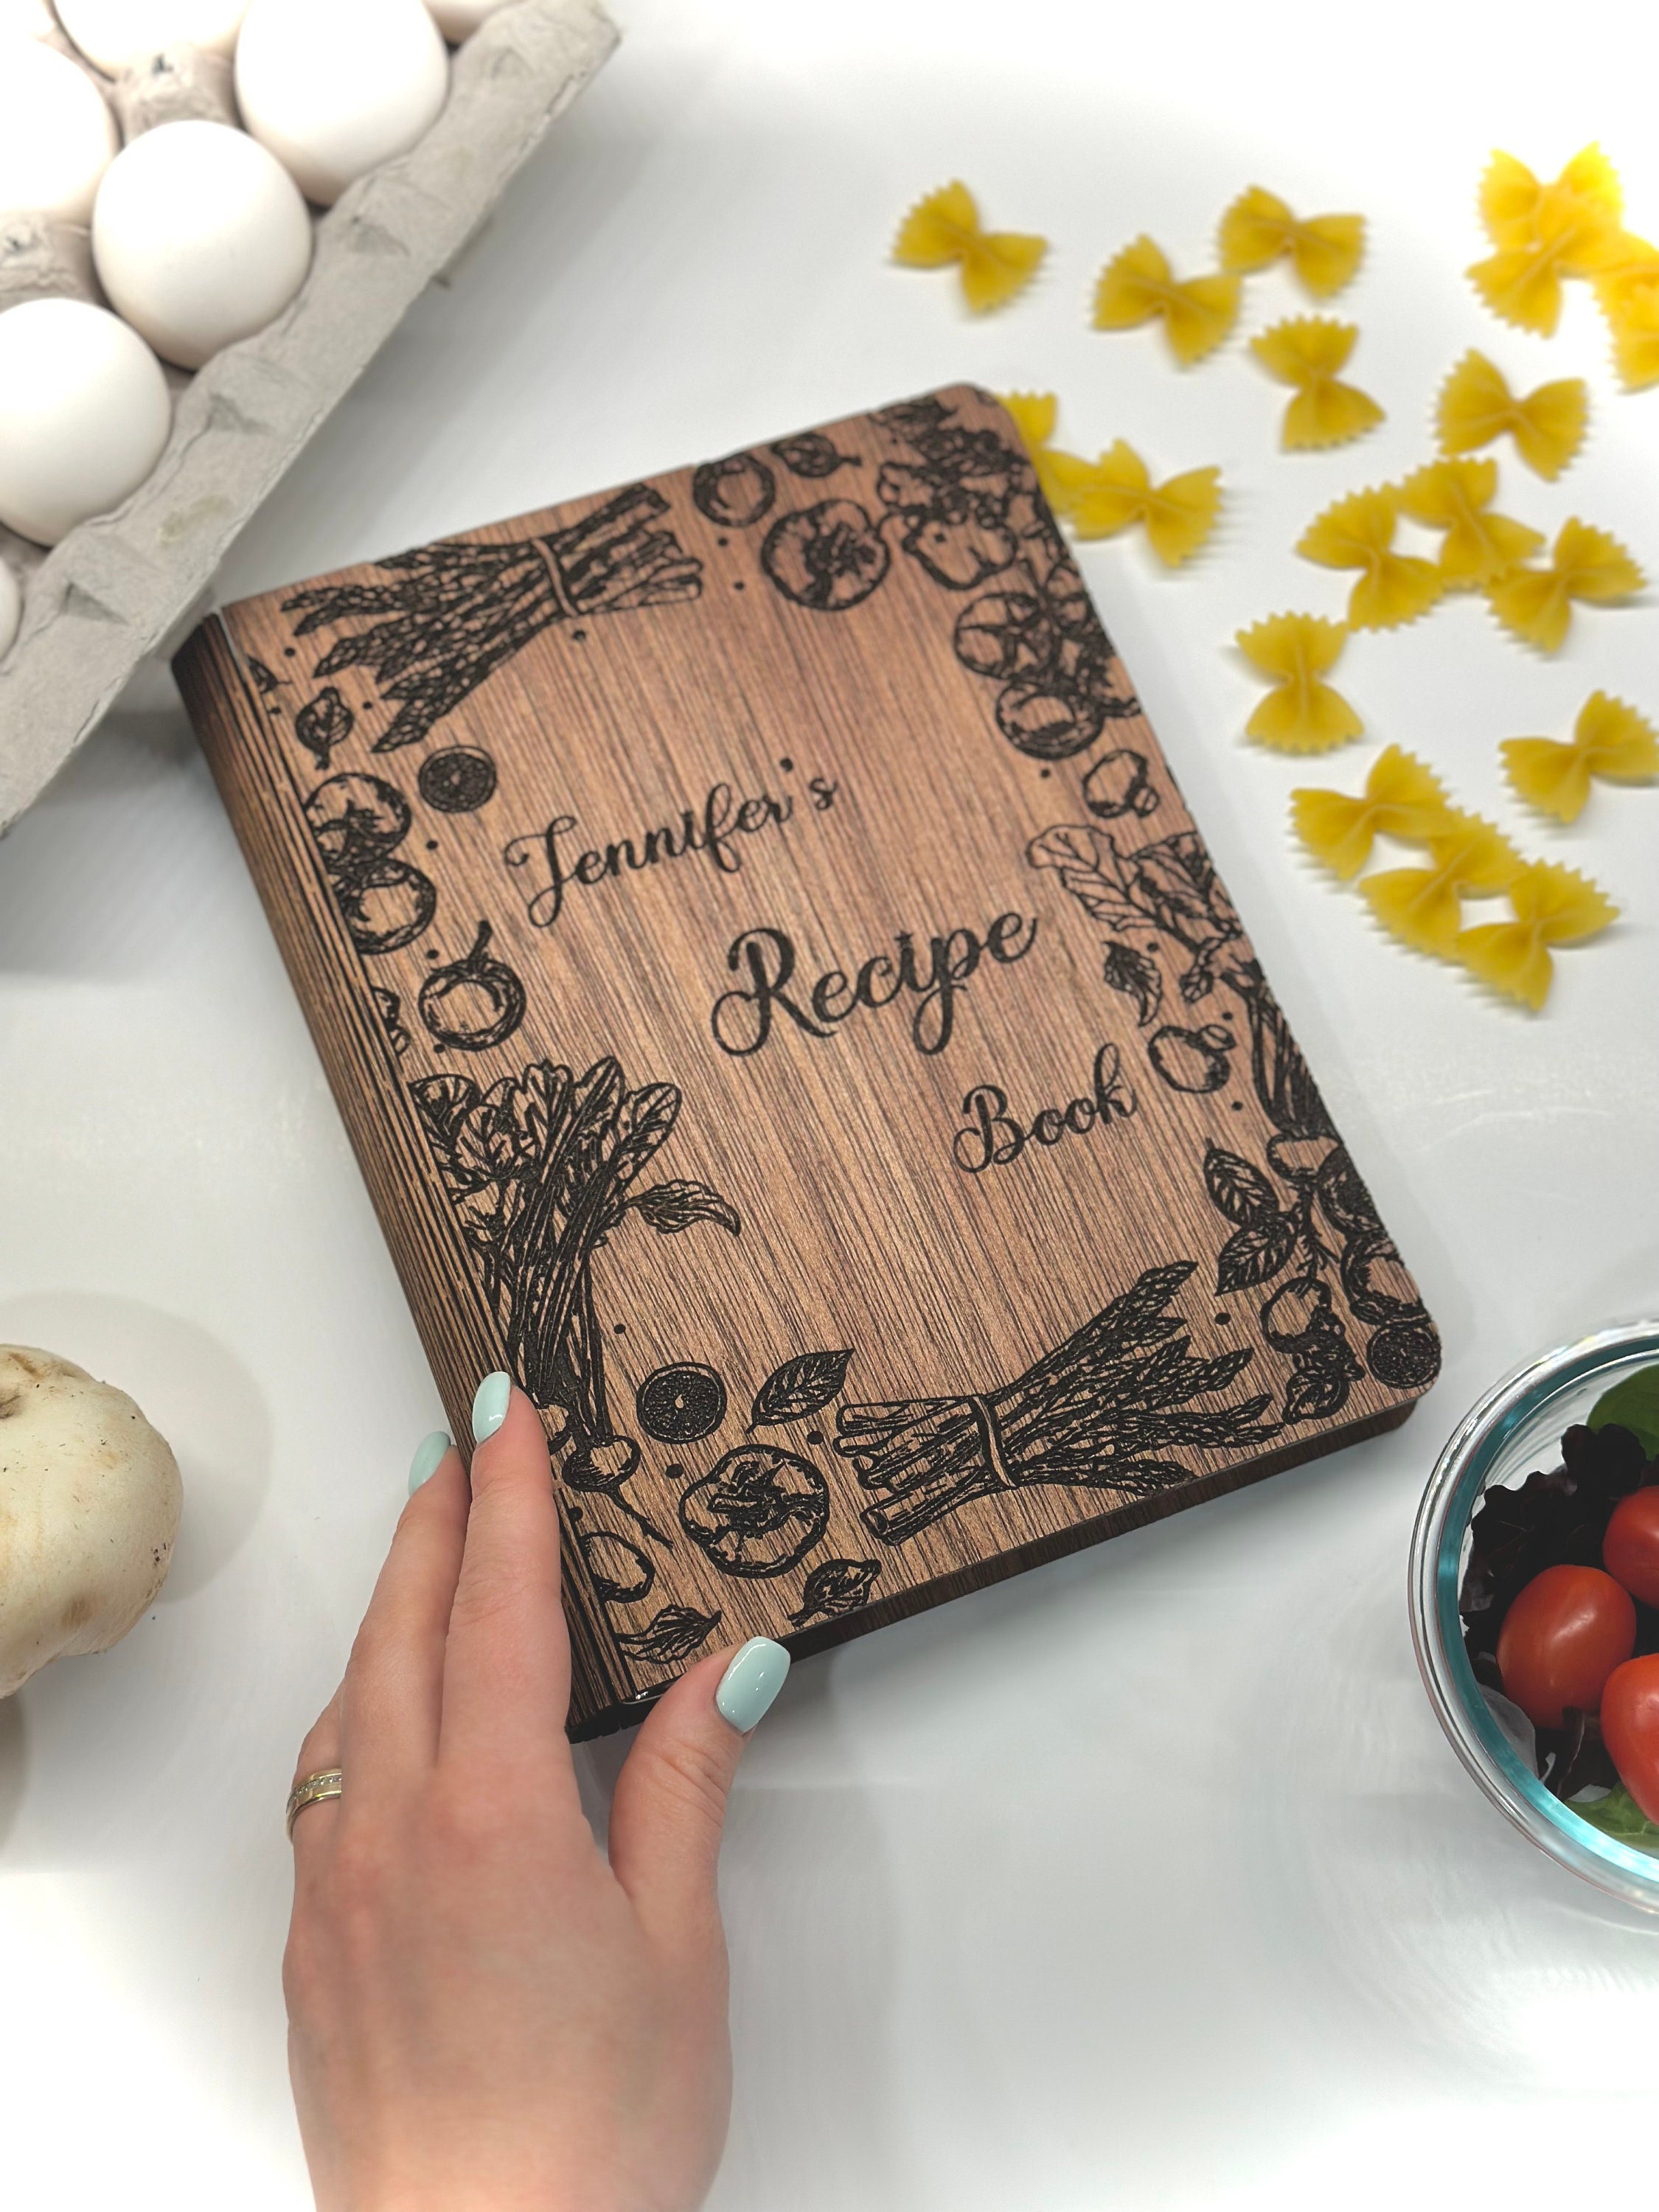 DIY Recipe Book: Blank Recipe Book to Write in Your Own Recipes | Customized Cookbook for Women, Wife, Mom, Grandma | Blank Recipe Book with Index | DIY Recipe Book | Empty Cookbook to Note Down My Favorite Recipes (Recipe Journal and Organizer) [Book]